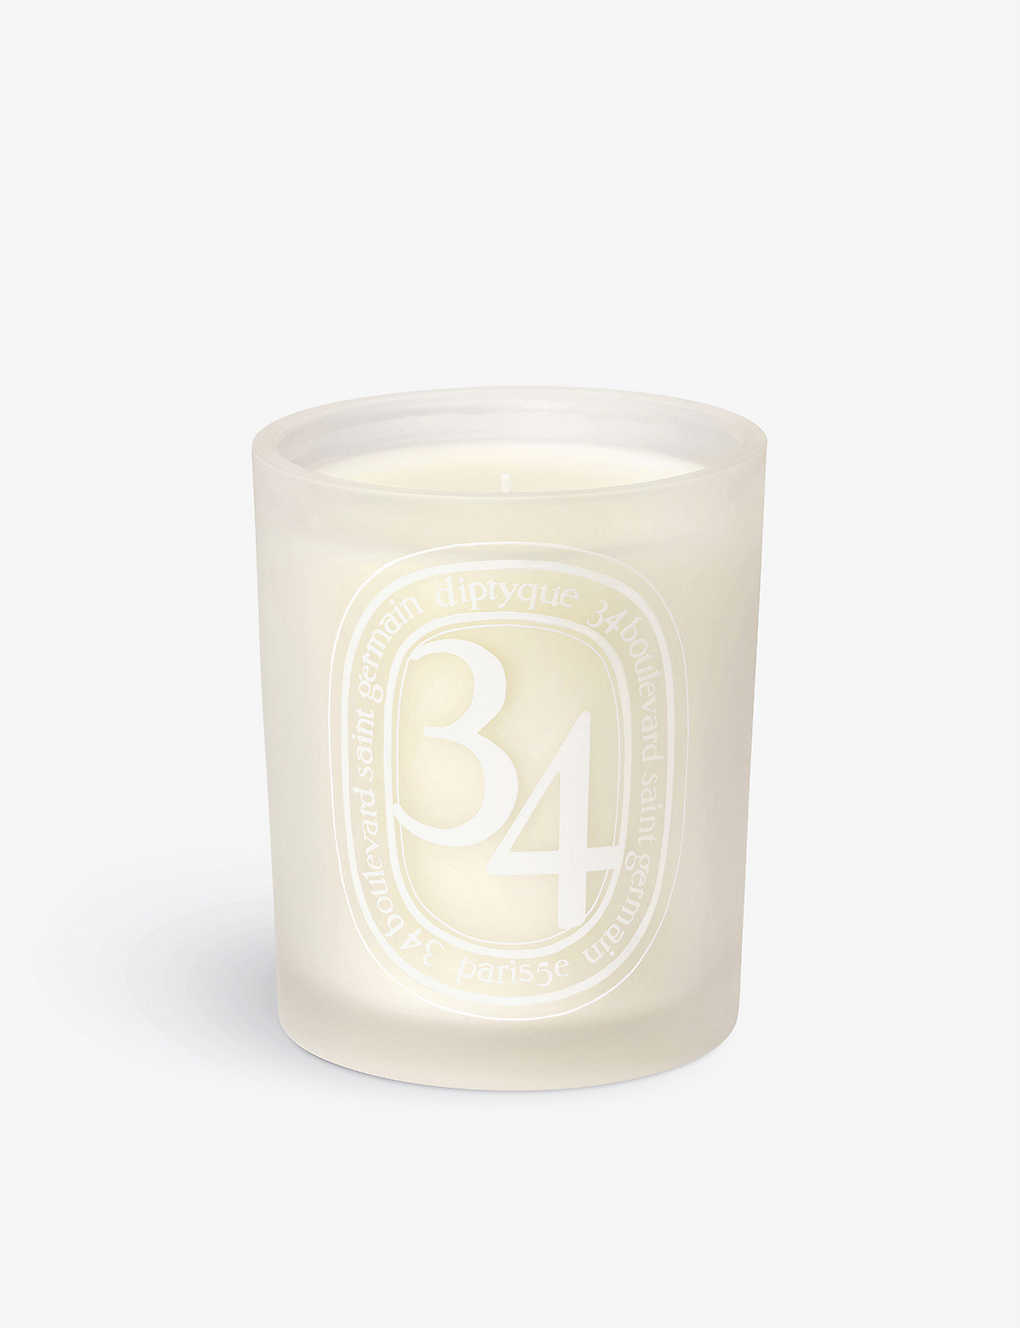 Diptyque 34 Boulevard Saint Germain Scented Candle 300g